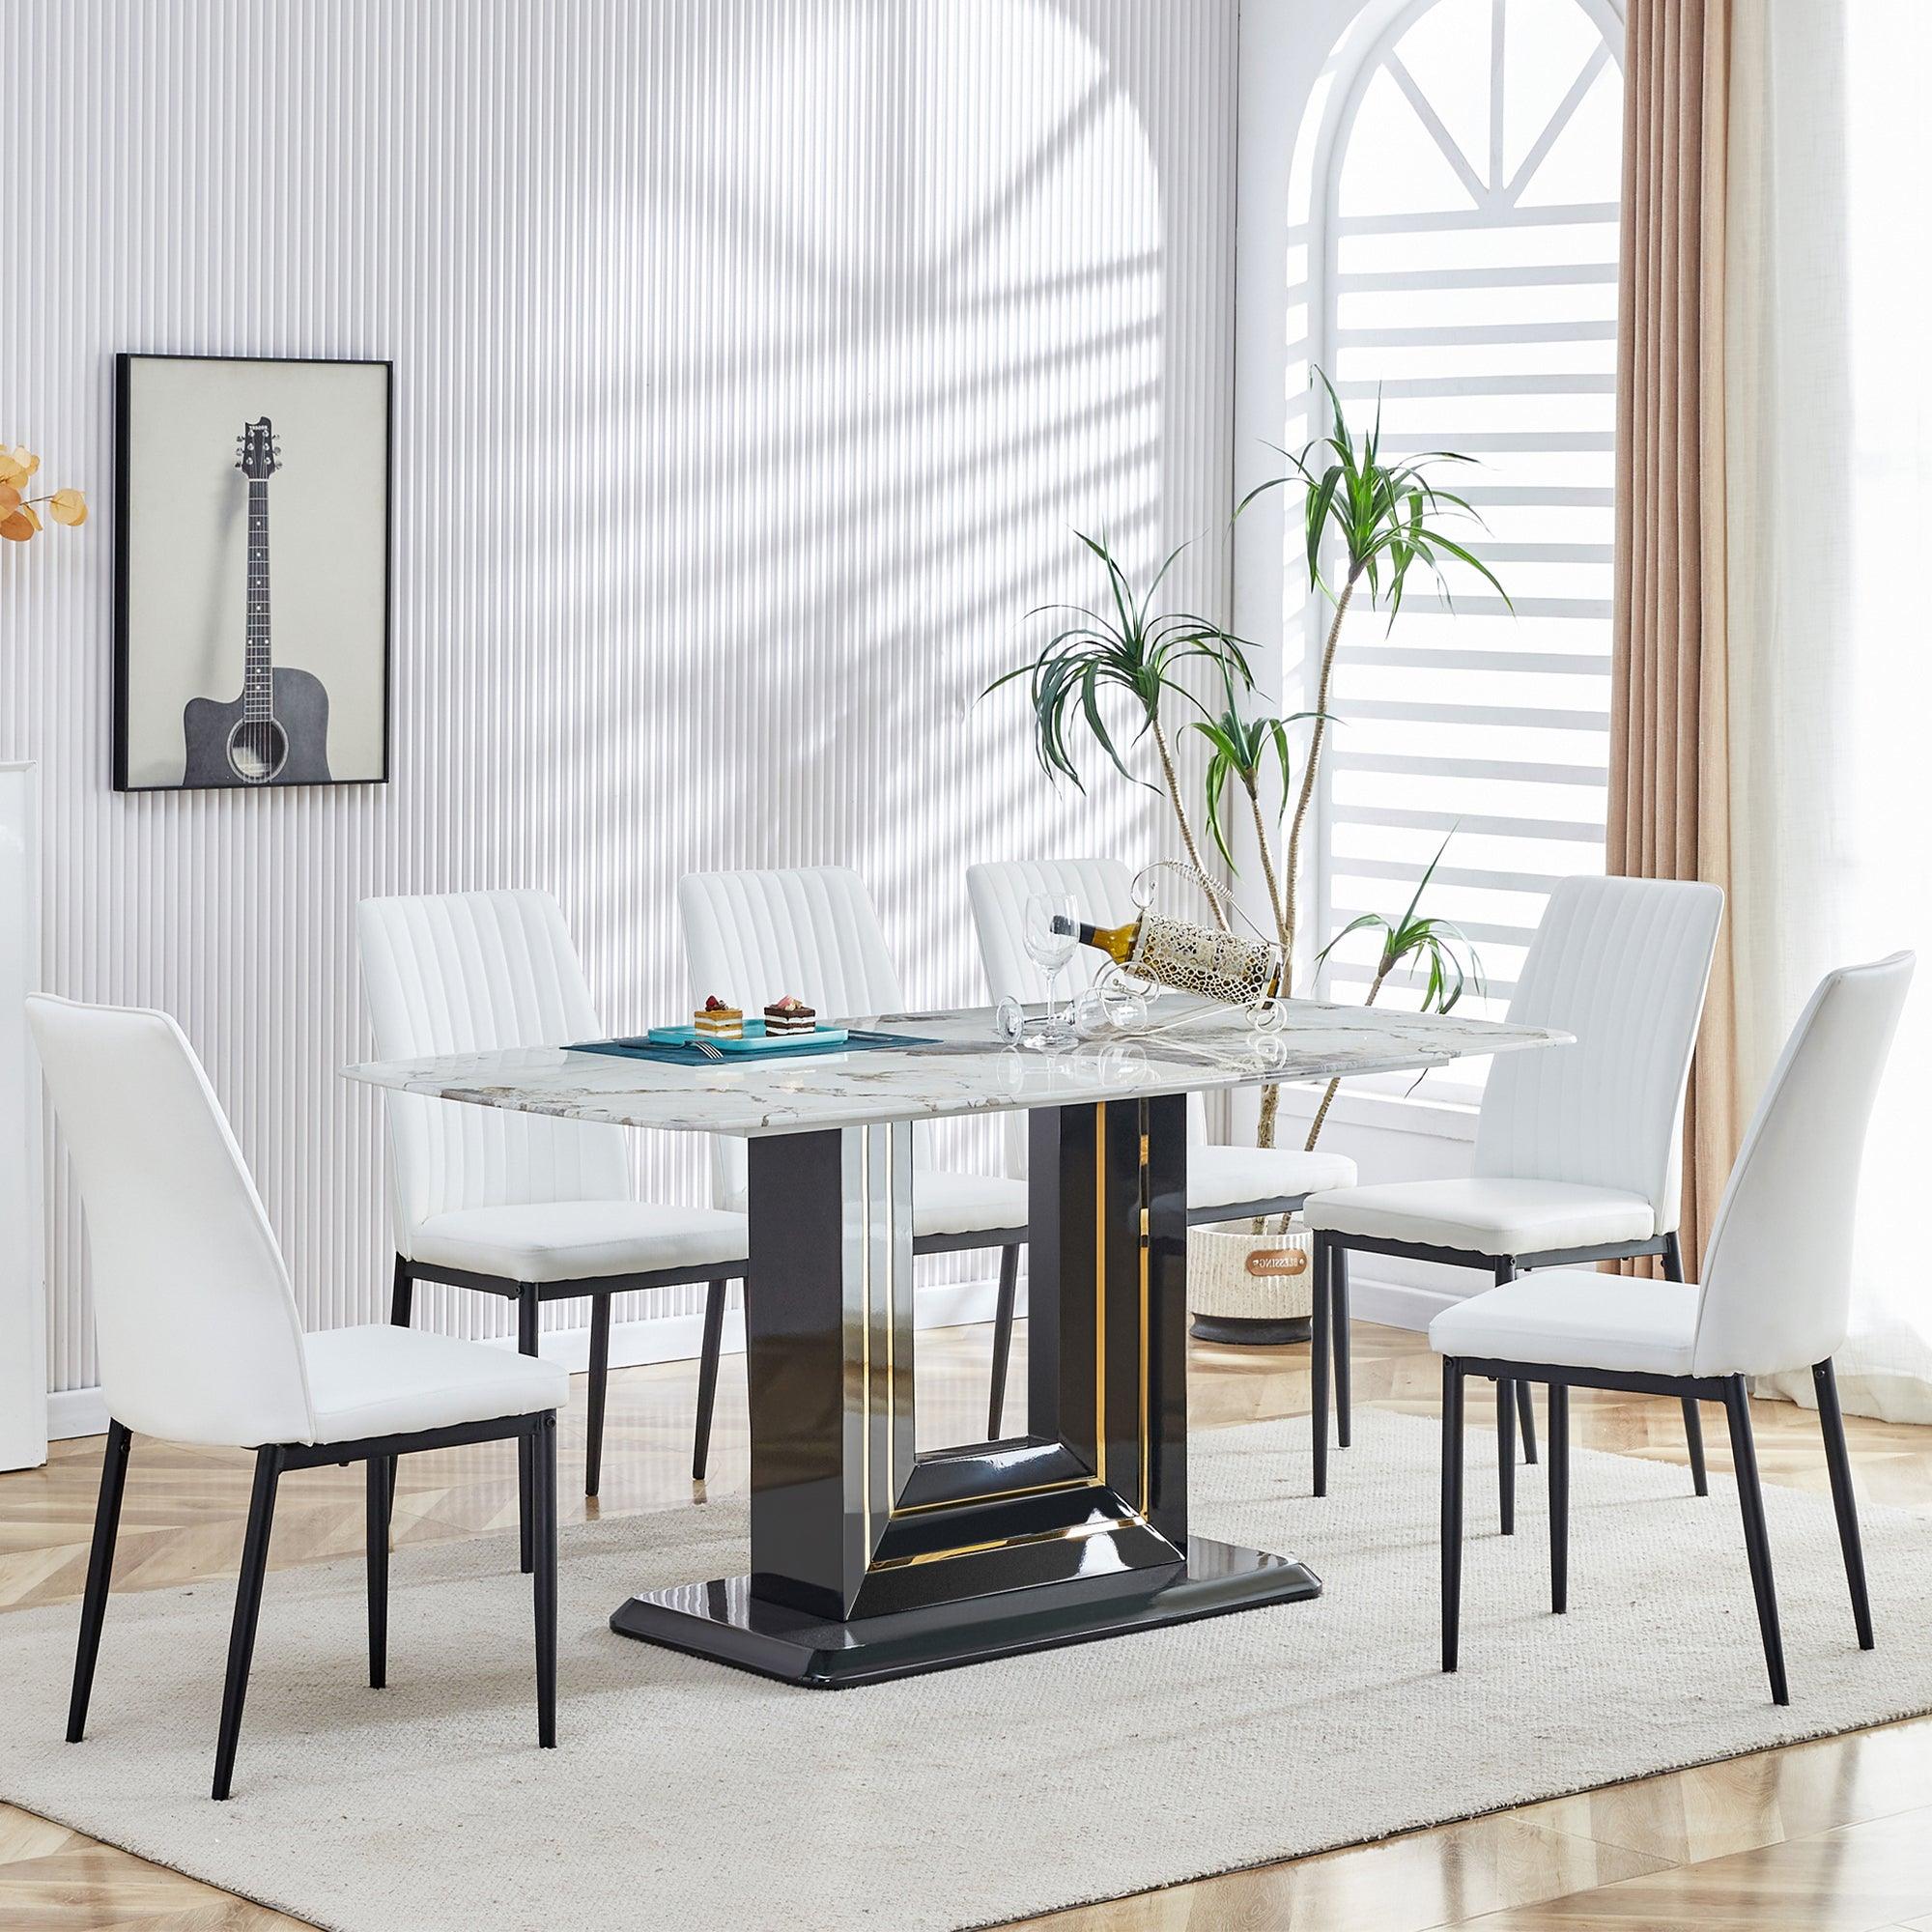 🆓🚛 7-Piece Dining Set, Modern Faux Marble White Glass Rectangular Dining Room Table With Mdf Base, 6 White Dining Chairs